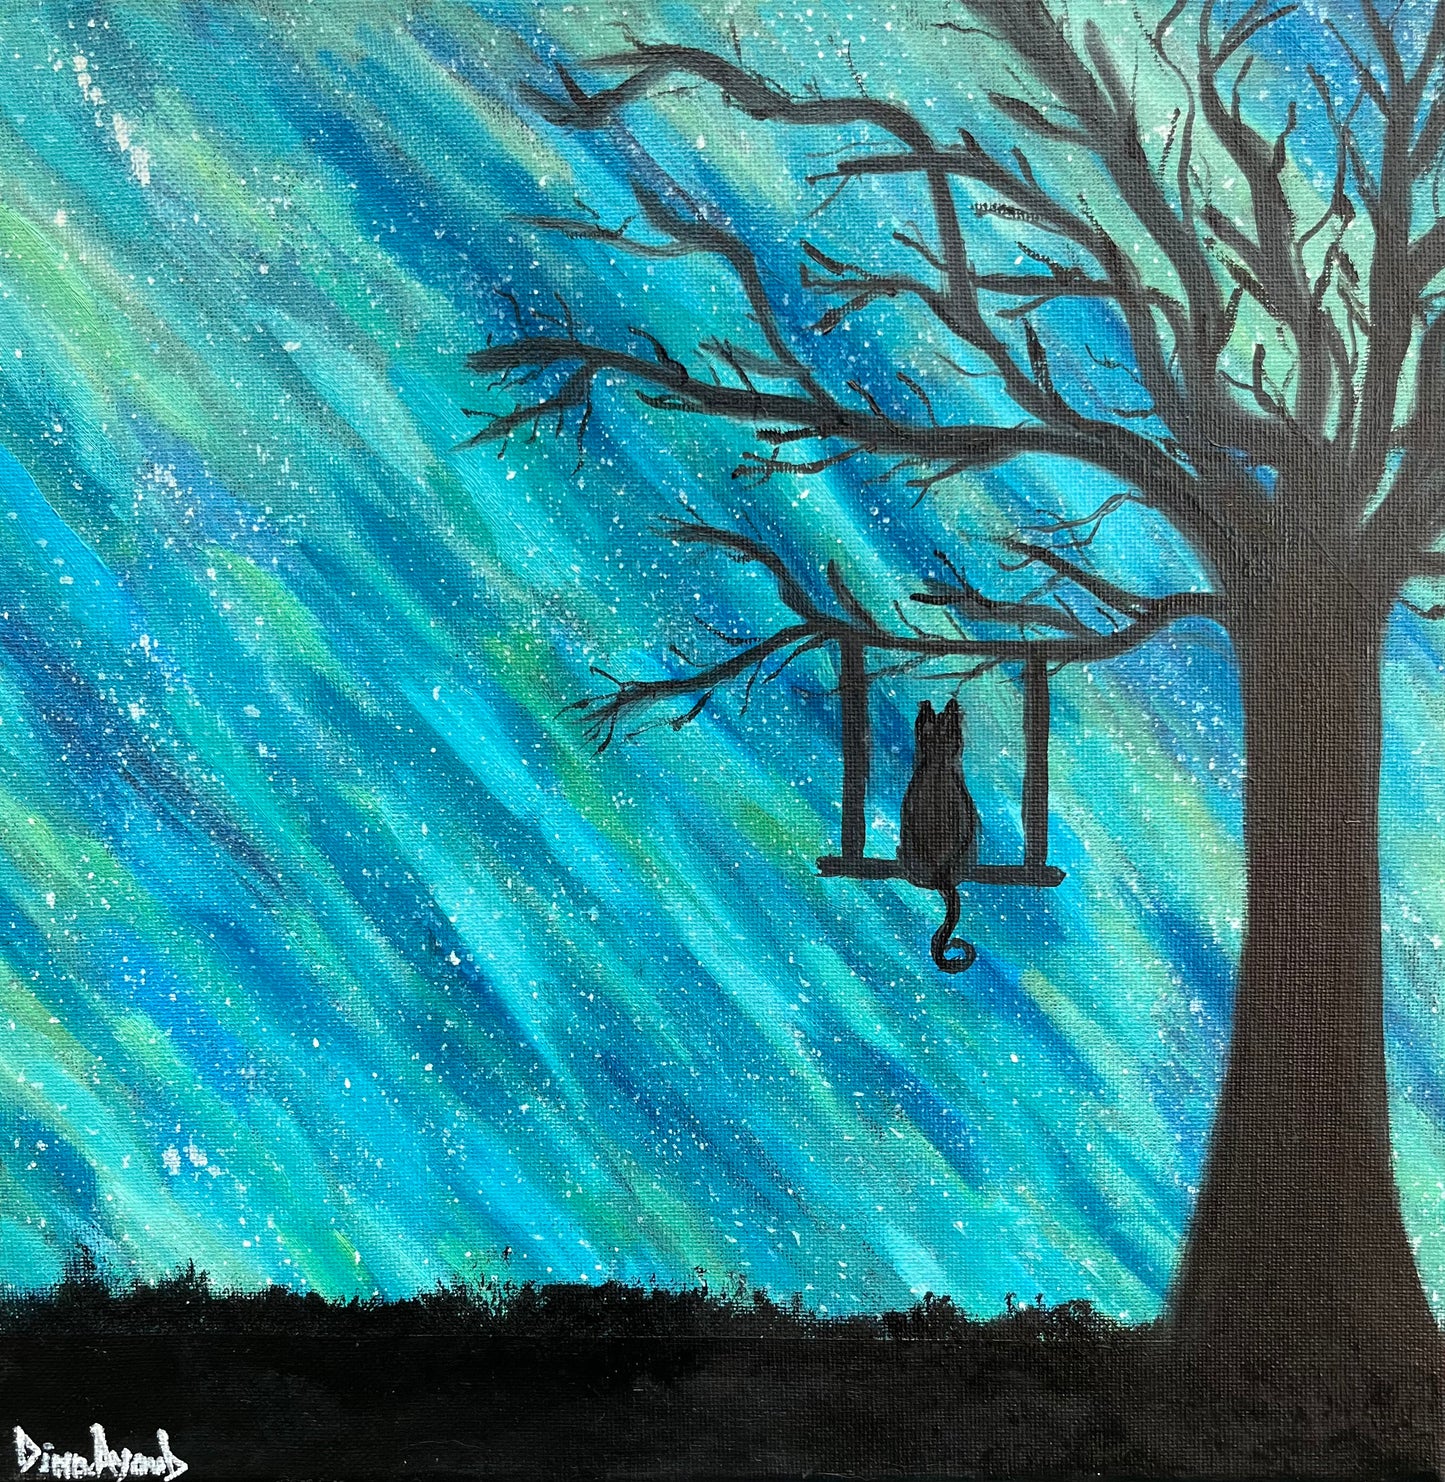 Original Acrylic painting of cat in a tree silhouette against a colorful Aurora sky